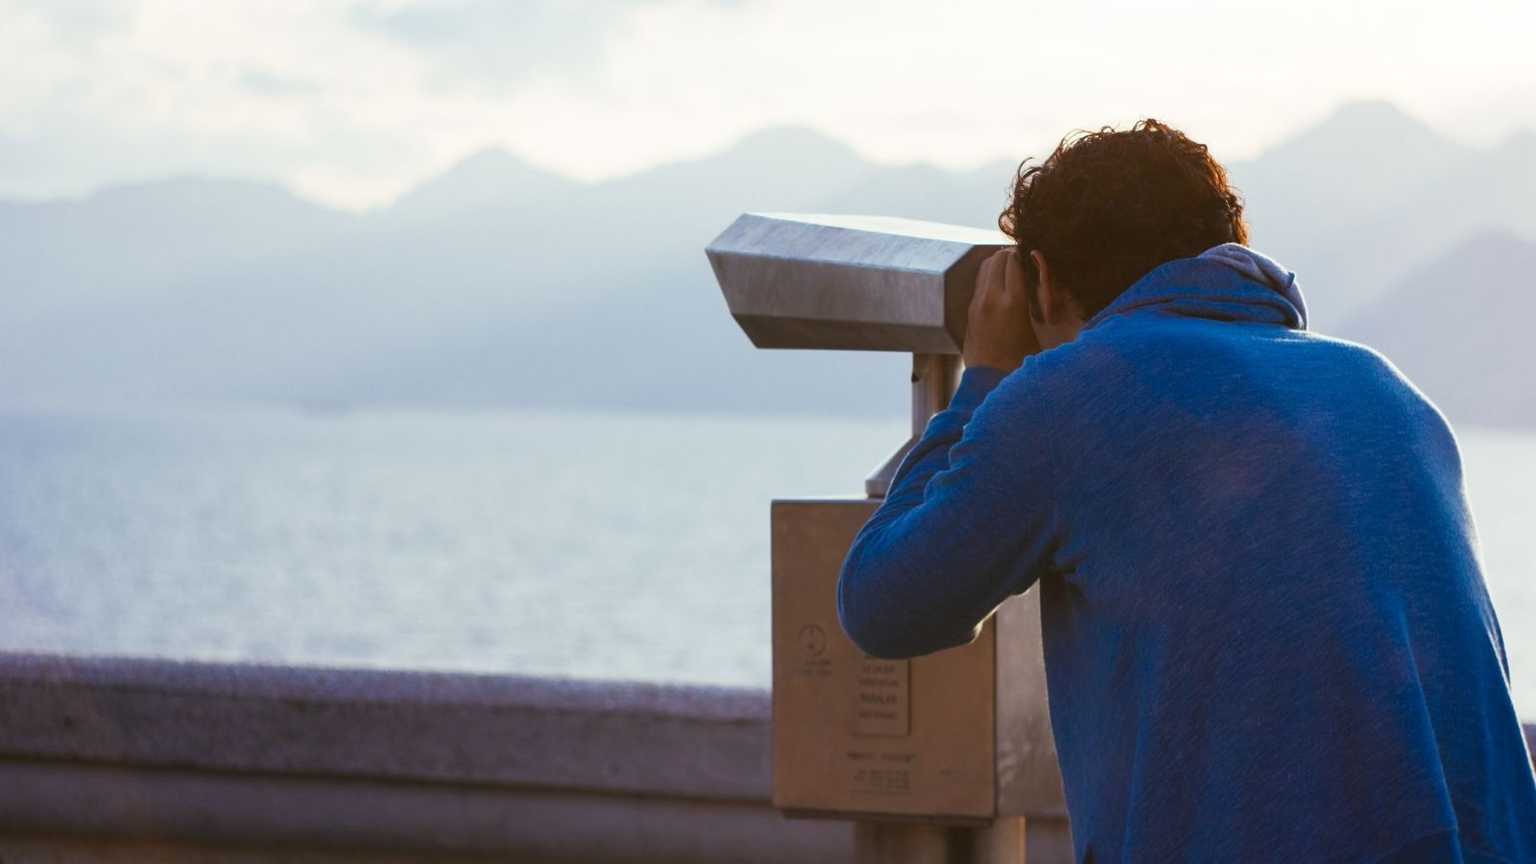 A person looking into the distance through large binoculars